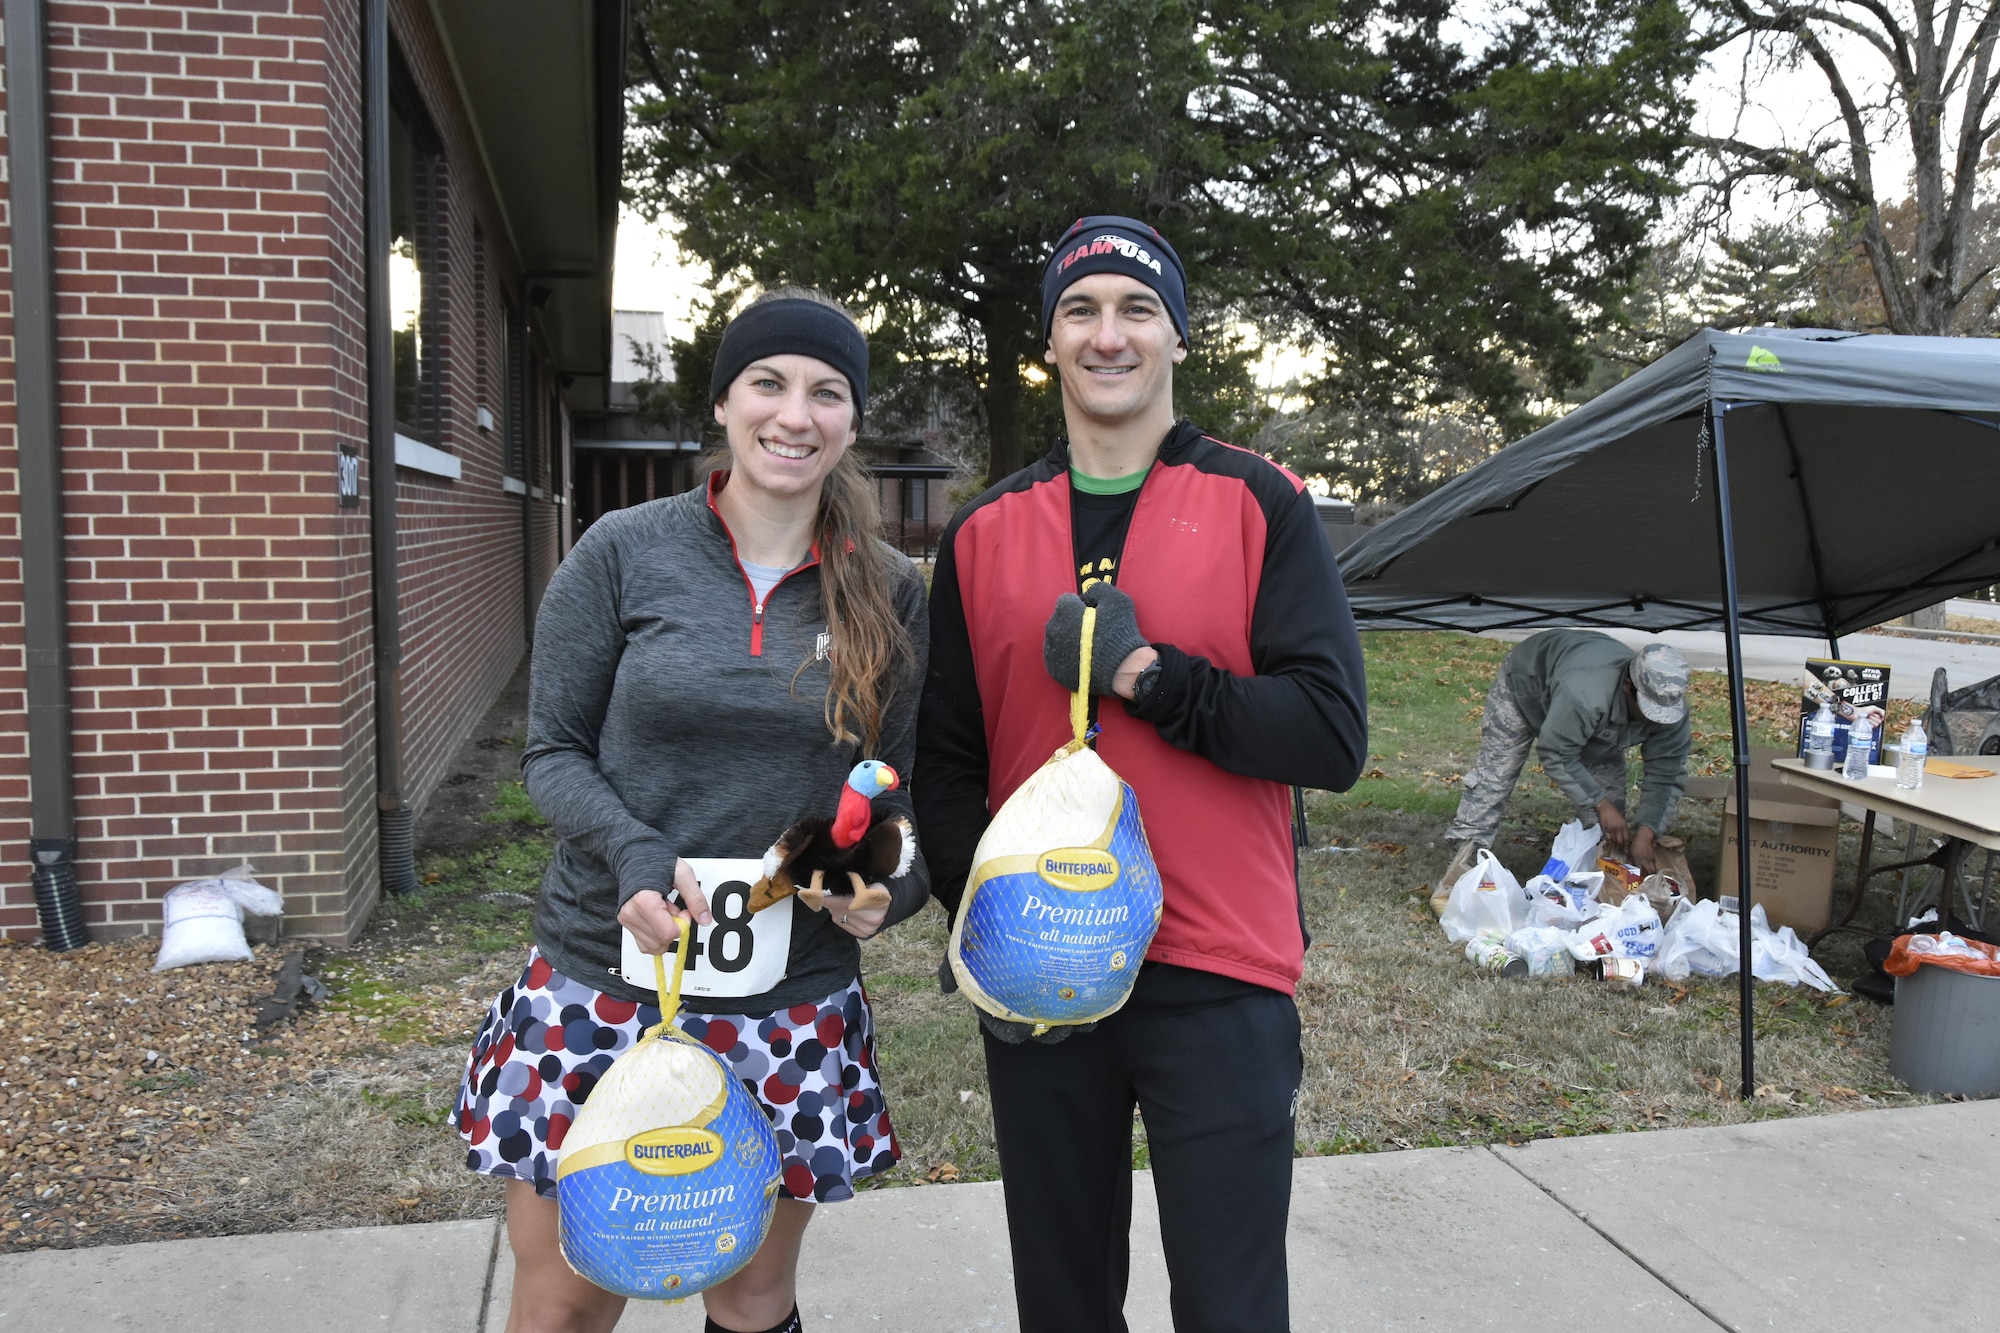 Capt. Elizabeth Sewell and AEDC Commander Col. Jeffery Geraghty show off the turkeys they took home for being the first in their respective divisions to cross the finish line at the 34th Annual AEDC Turkey Trot. The 5K and was held Nov. 15 at the Arnold Lakeside Center, Arnold Air Force Base. Sewell was the first female runner to complete the race with a time of 22 minutes 24 seconds, and Geraghty finished first among male runners with a time of 17 minutes 33 seconds. (U.S. Air Force photo by Bradley Hicks)